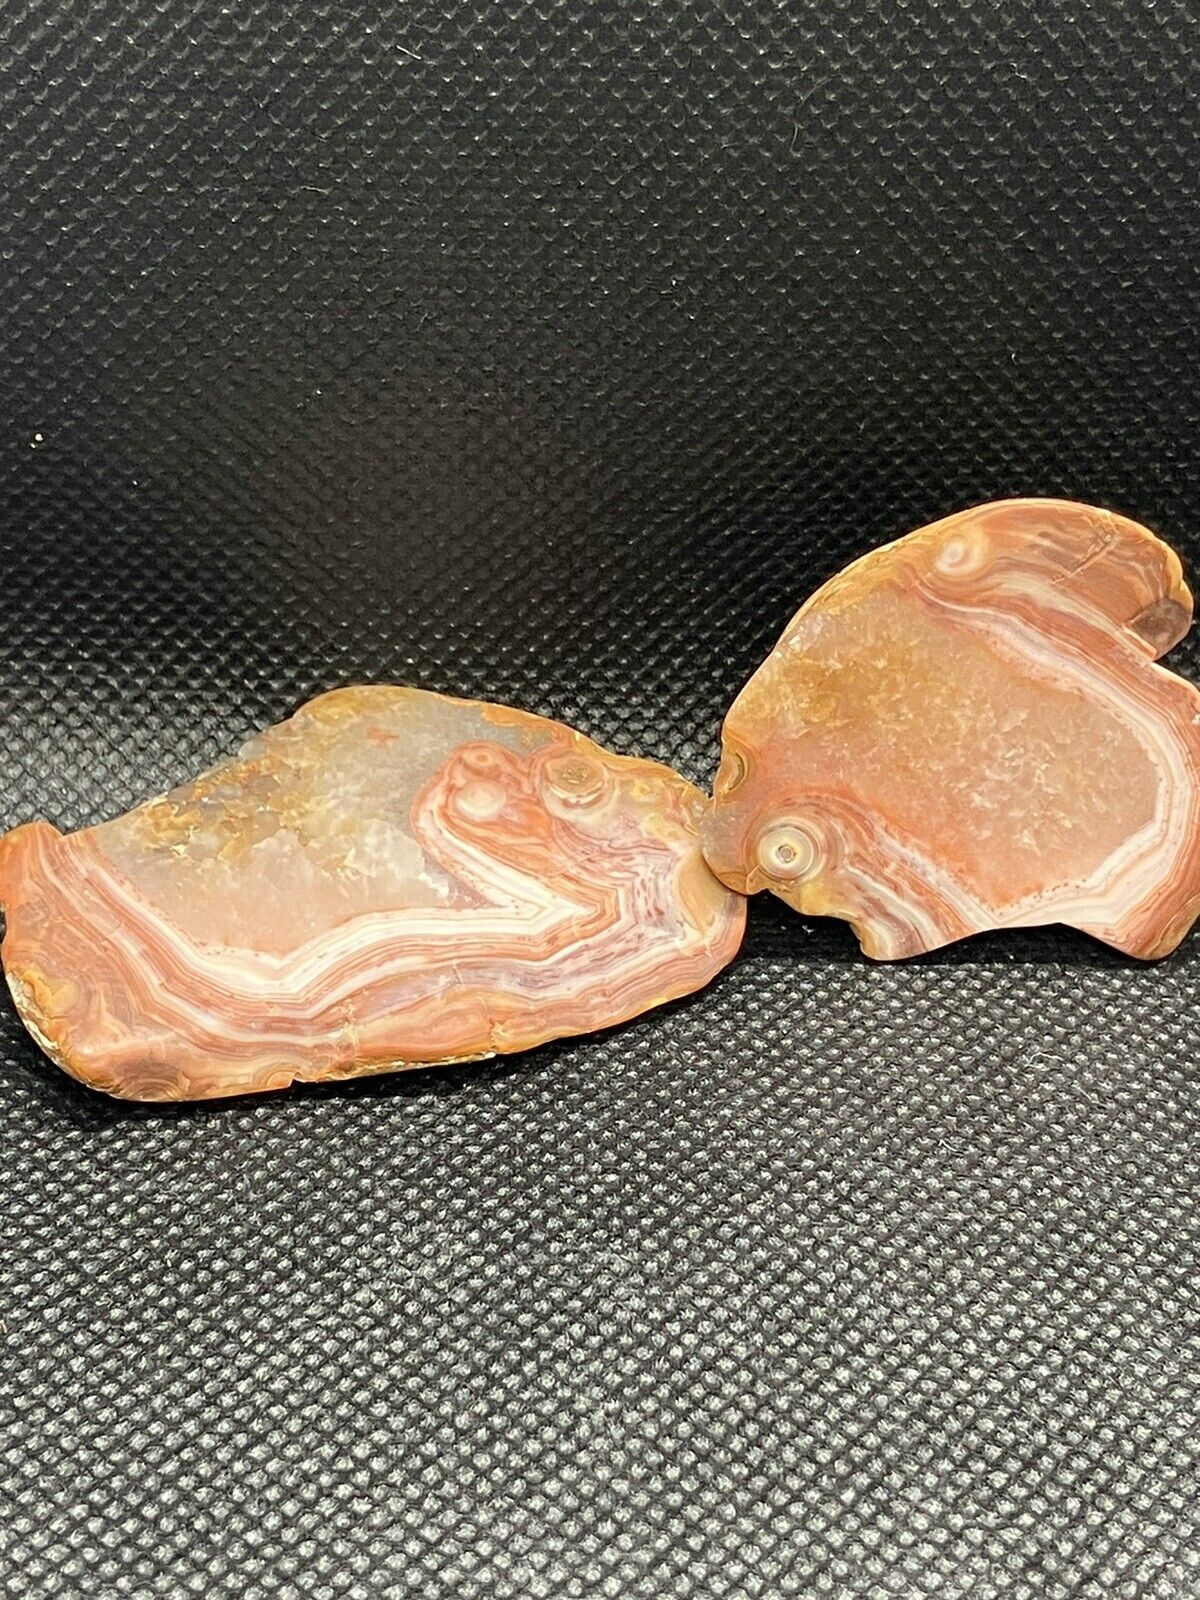 BAHIA AGATE SLICES  SEMI POLSIHED FOR CABBING OR DISPLAY